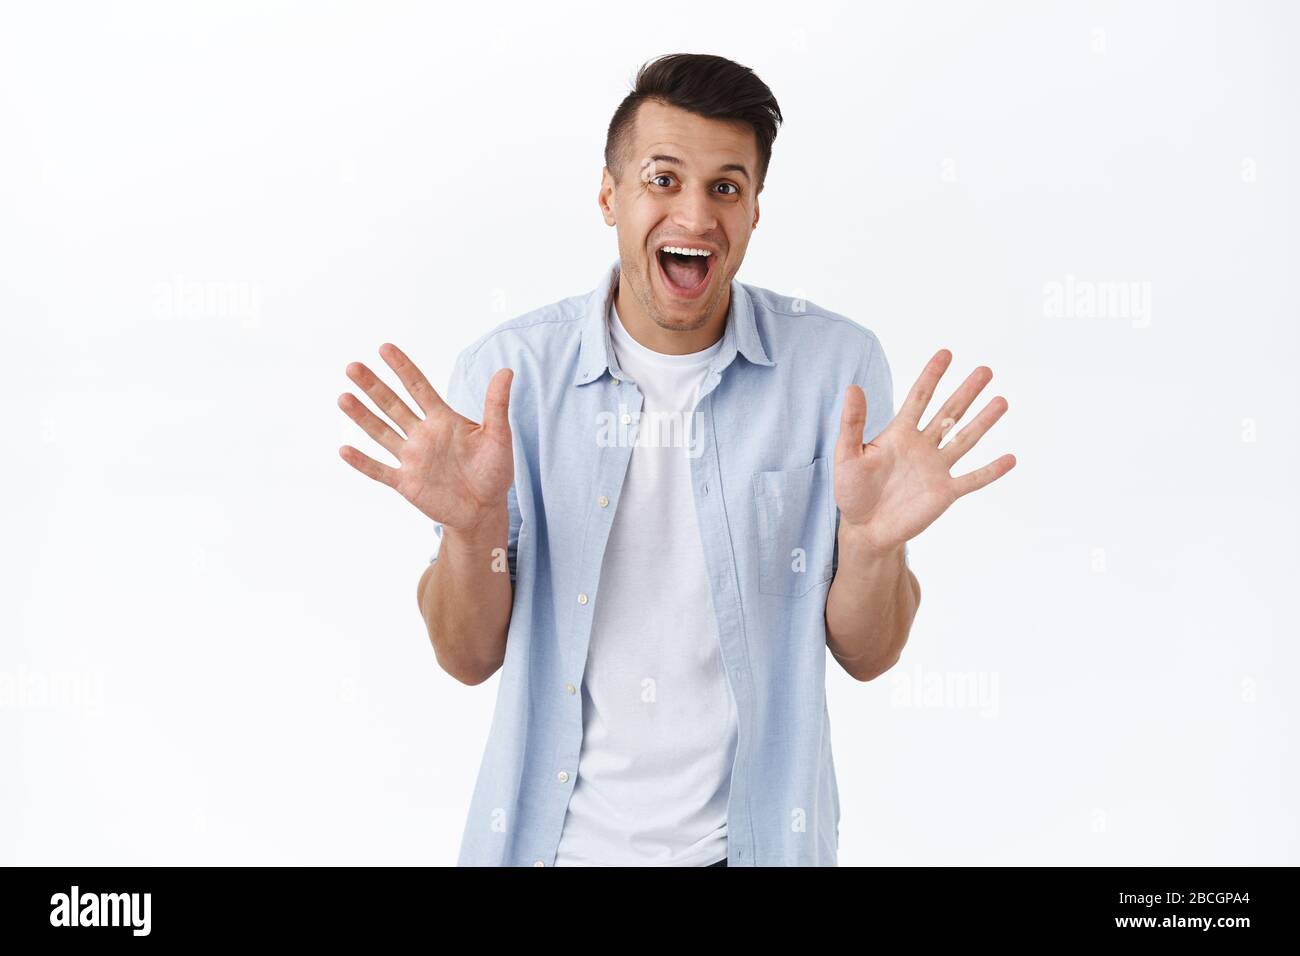 Cheerful handsome happy man make jazz hands, waving empty palms and smiling rejoicing, saying hello or hi to friend, informal greeting concept Stock Photo